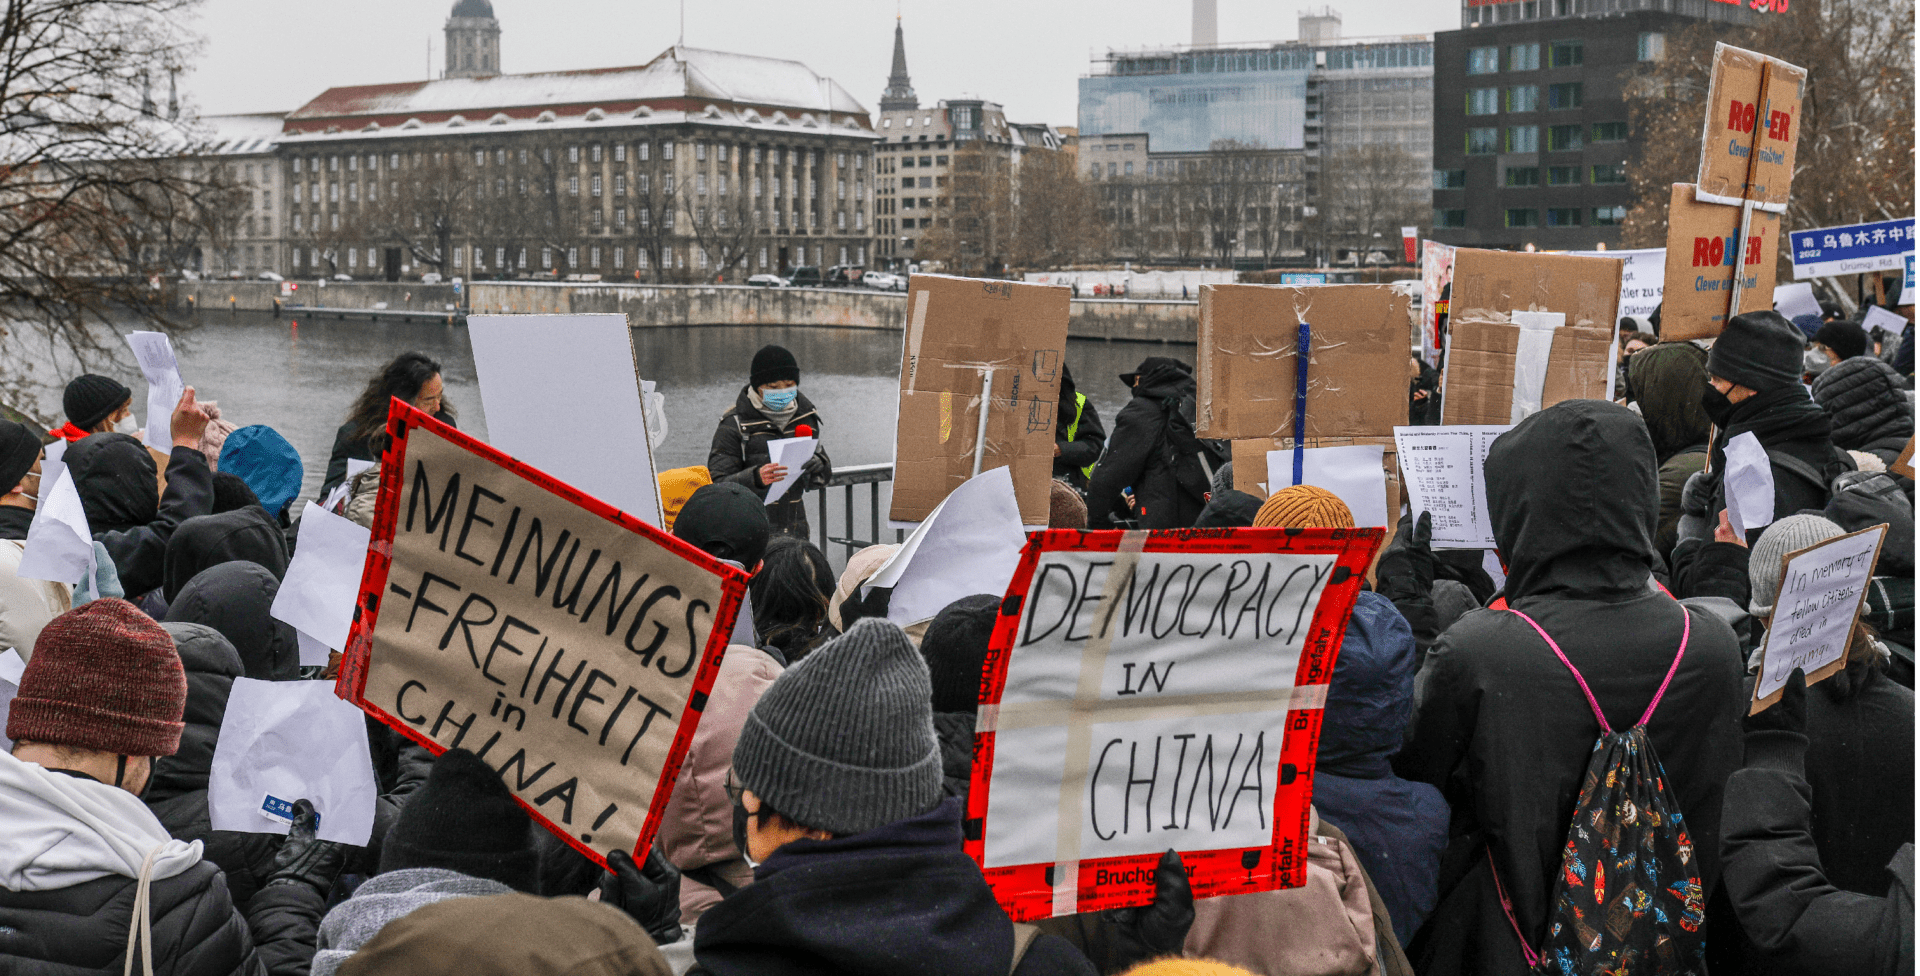 Demonstrators protest in front of the Chinese Embassy in solidarity with protesters in China on December 3, 2022 in Berlin, Germany